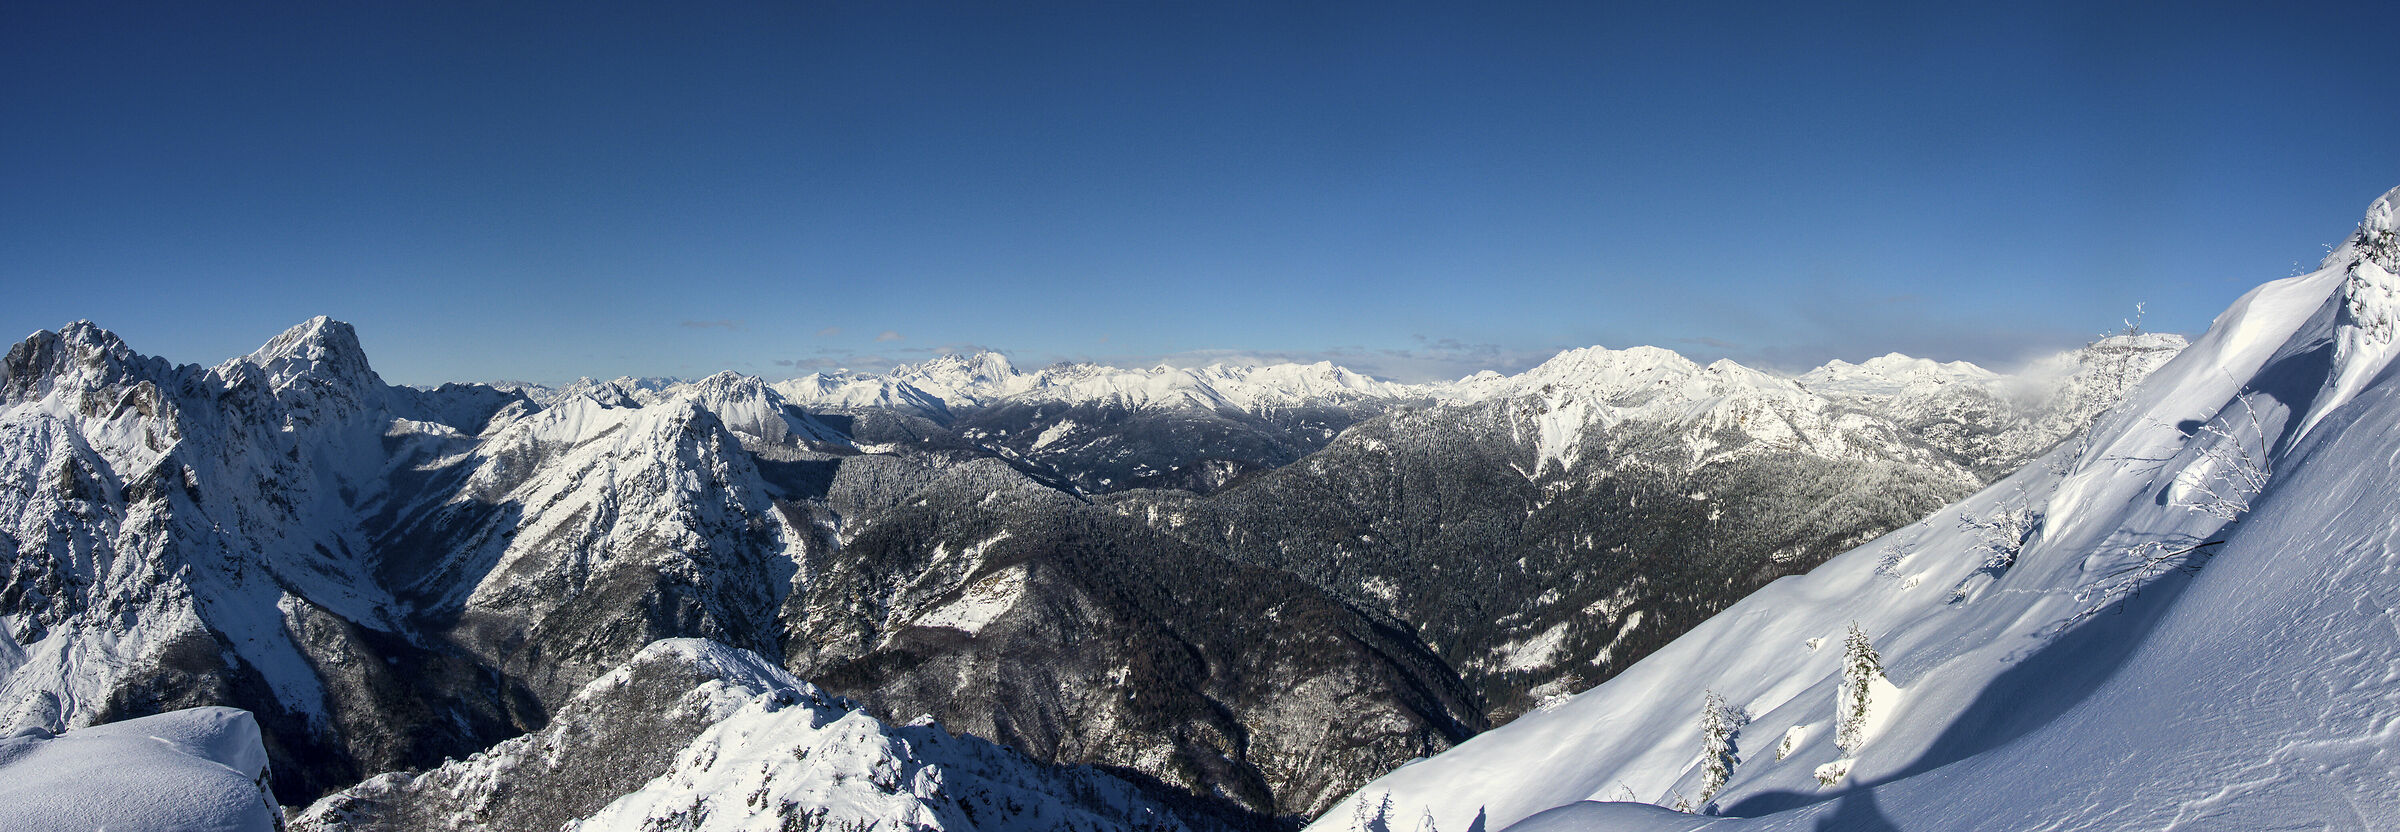 Carnic Alps Winter Overview...